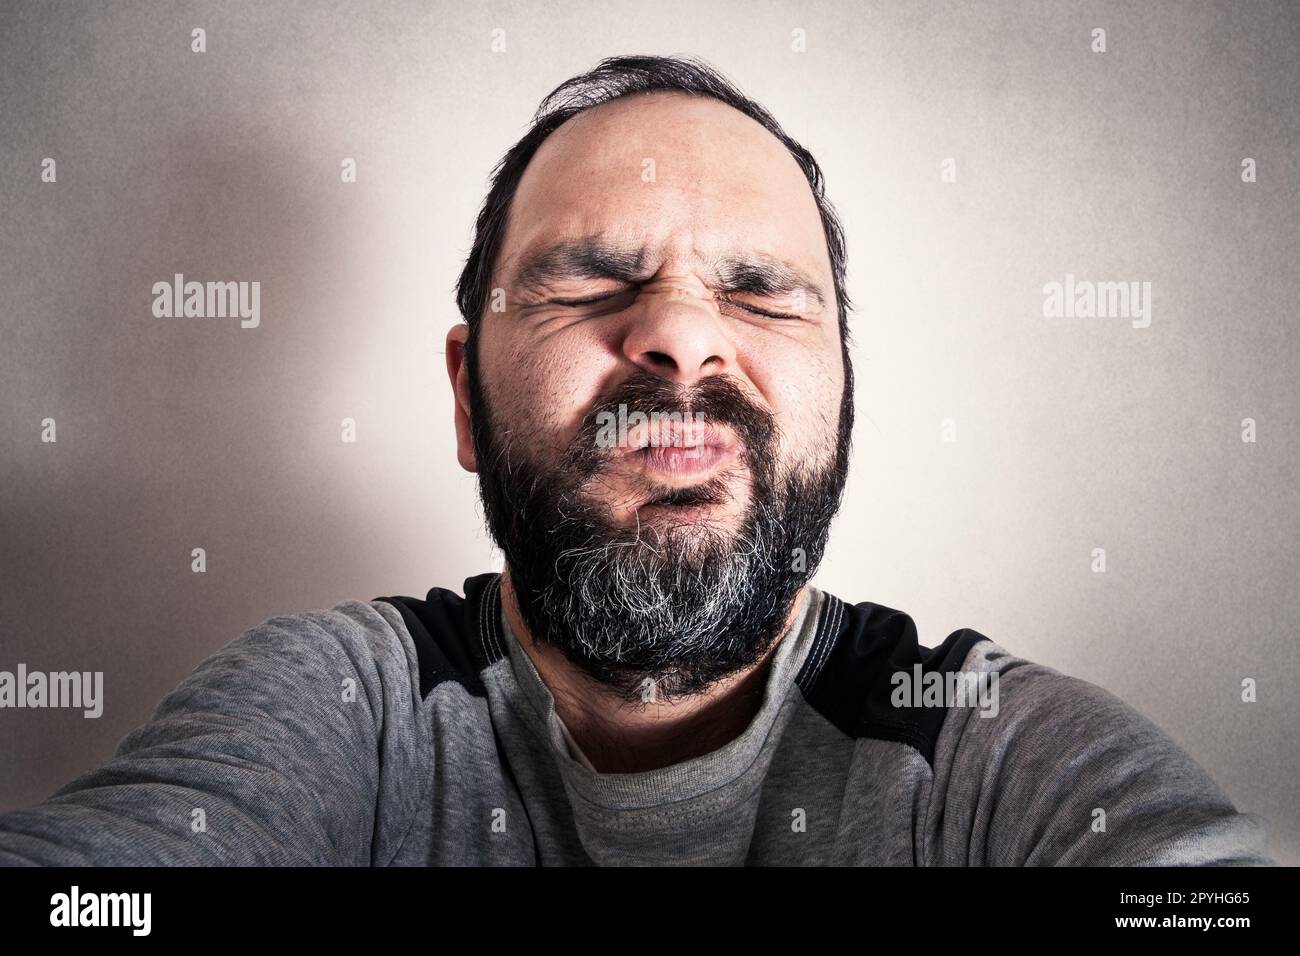 Funny man with the beard making expressions Stock Photo